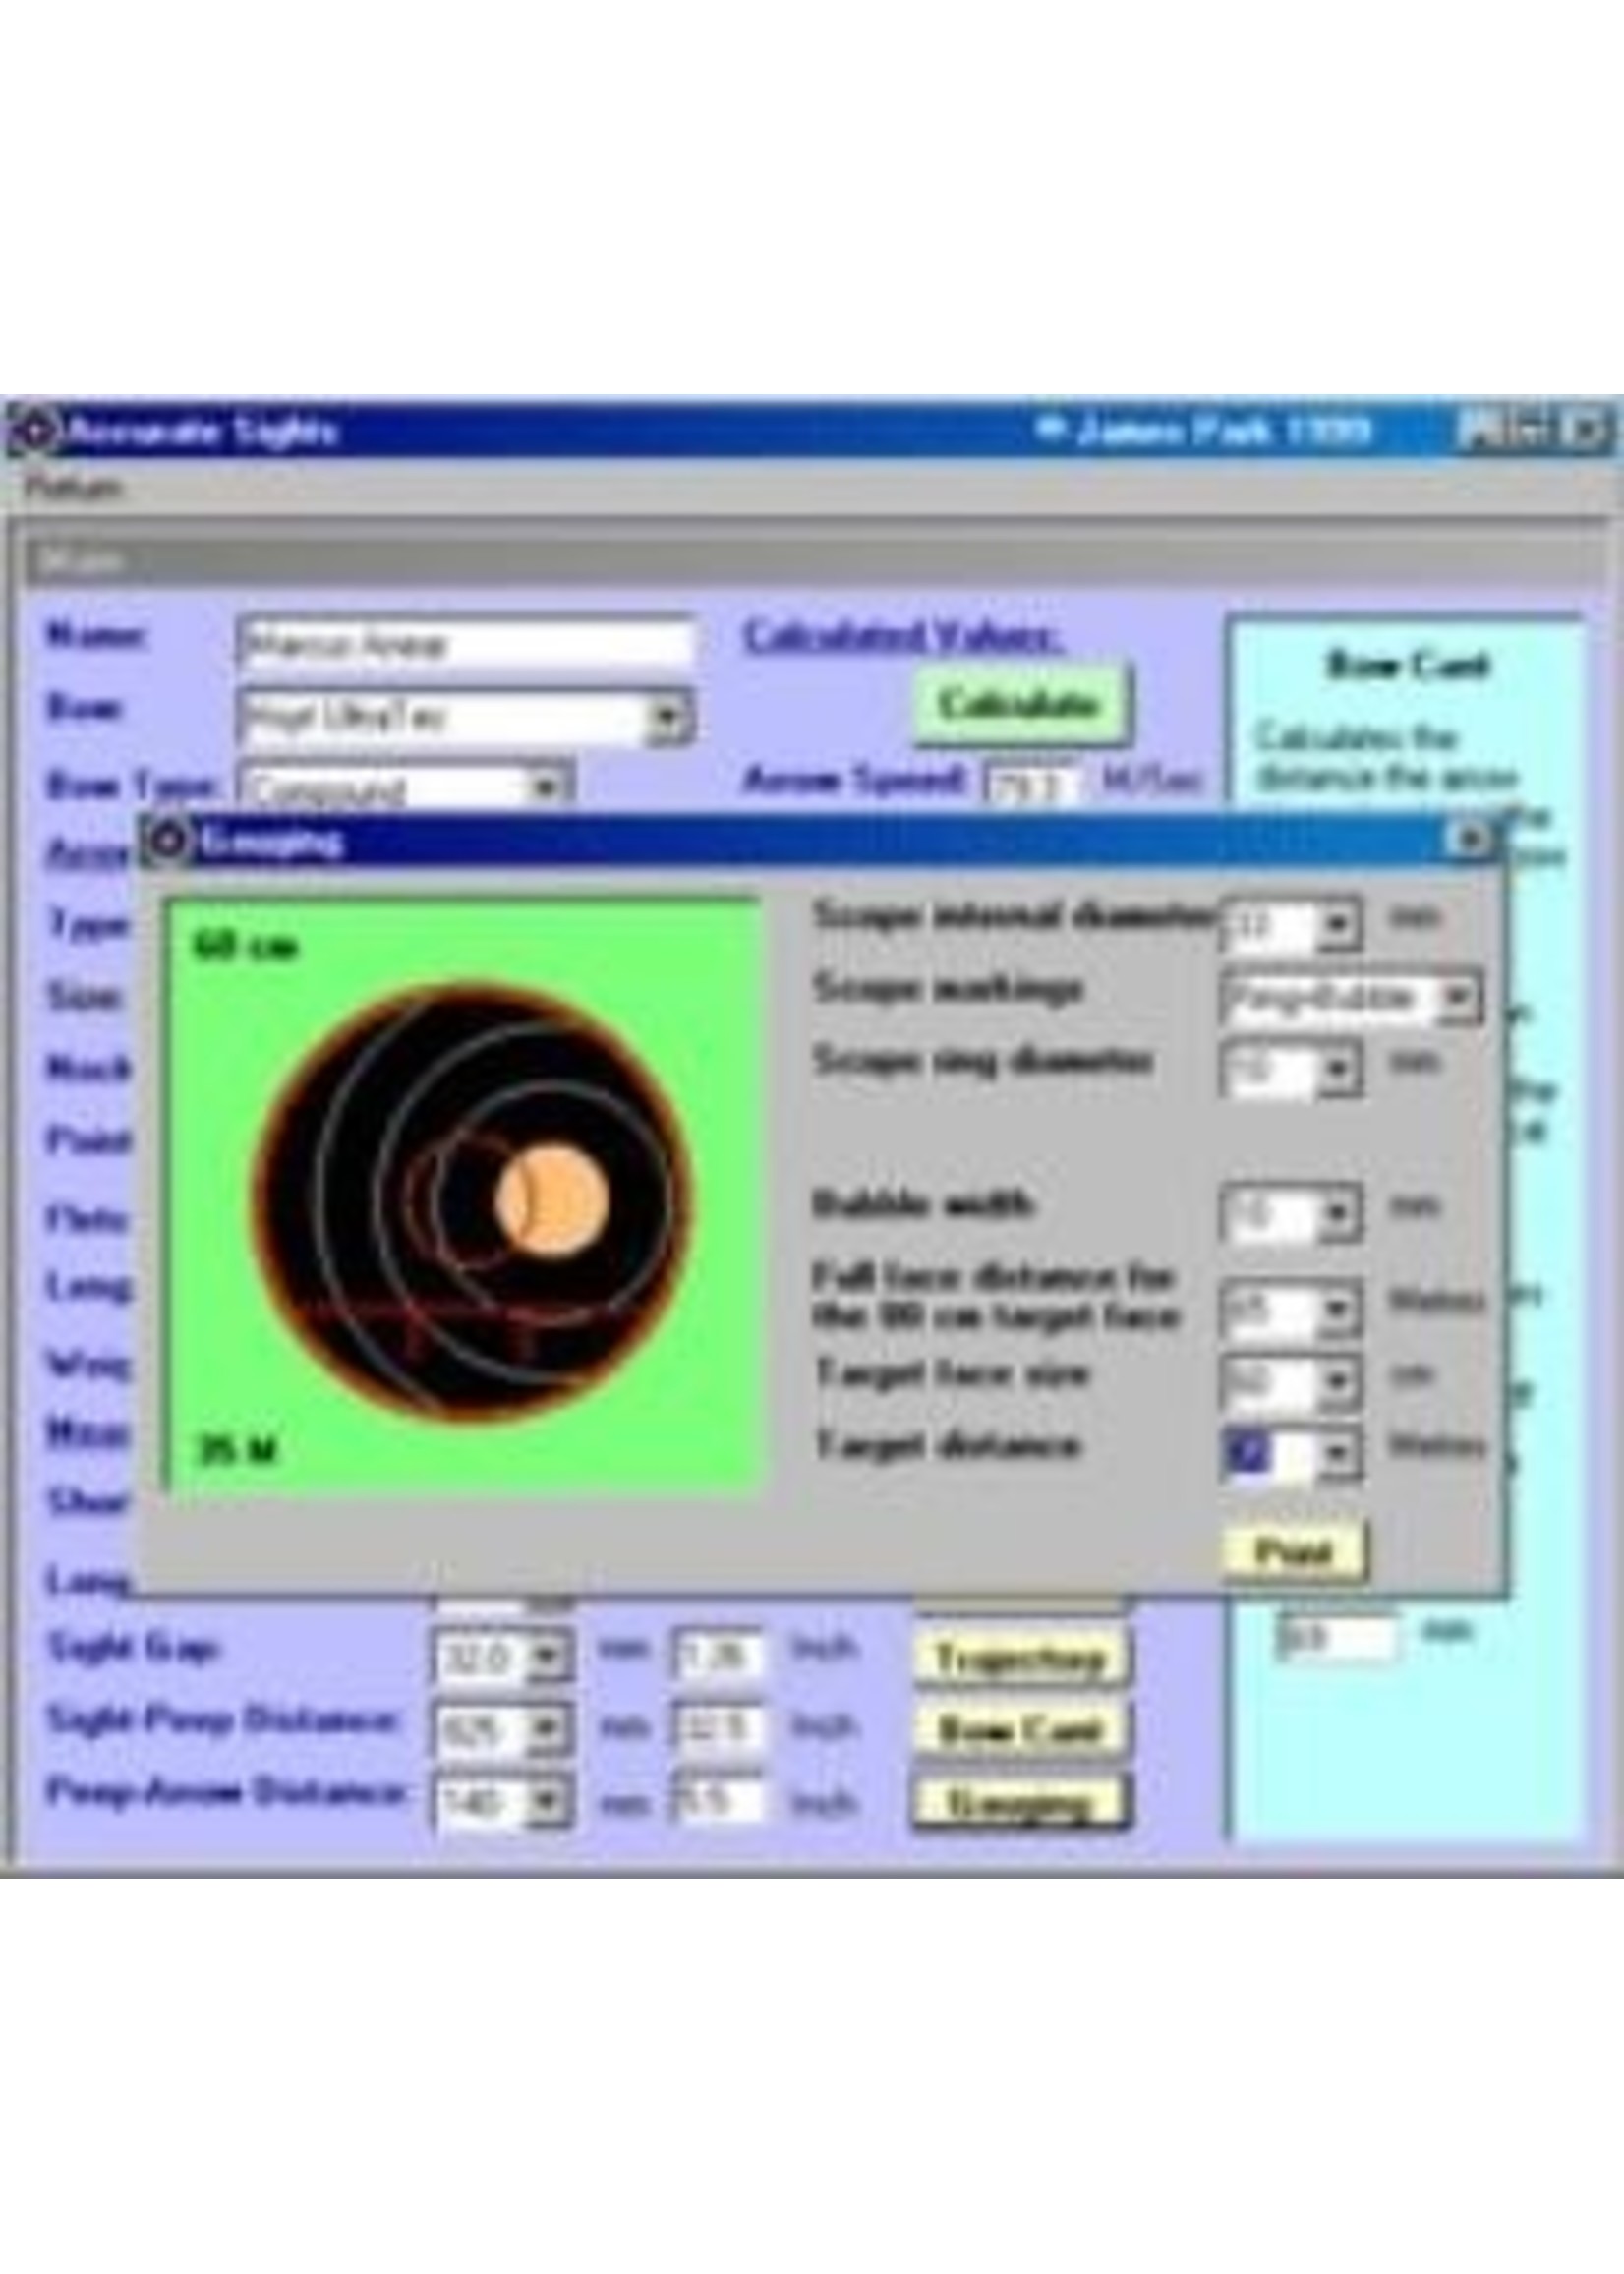 Accurate Sights Software v7